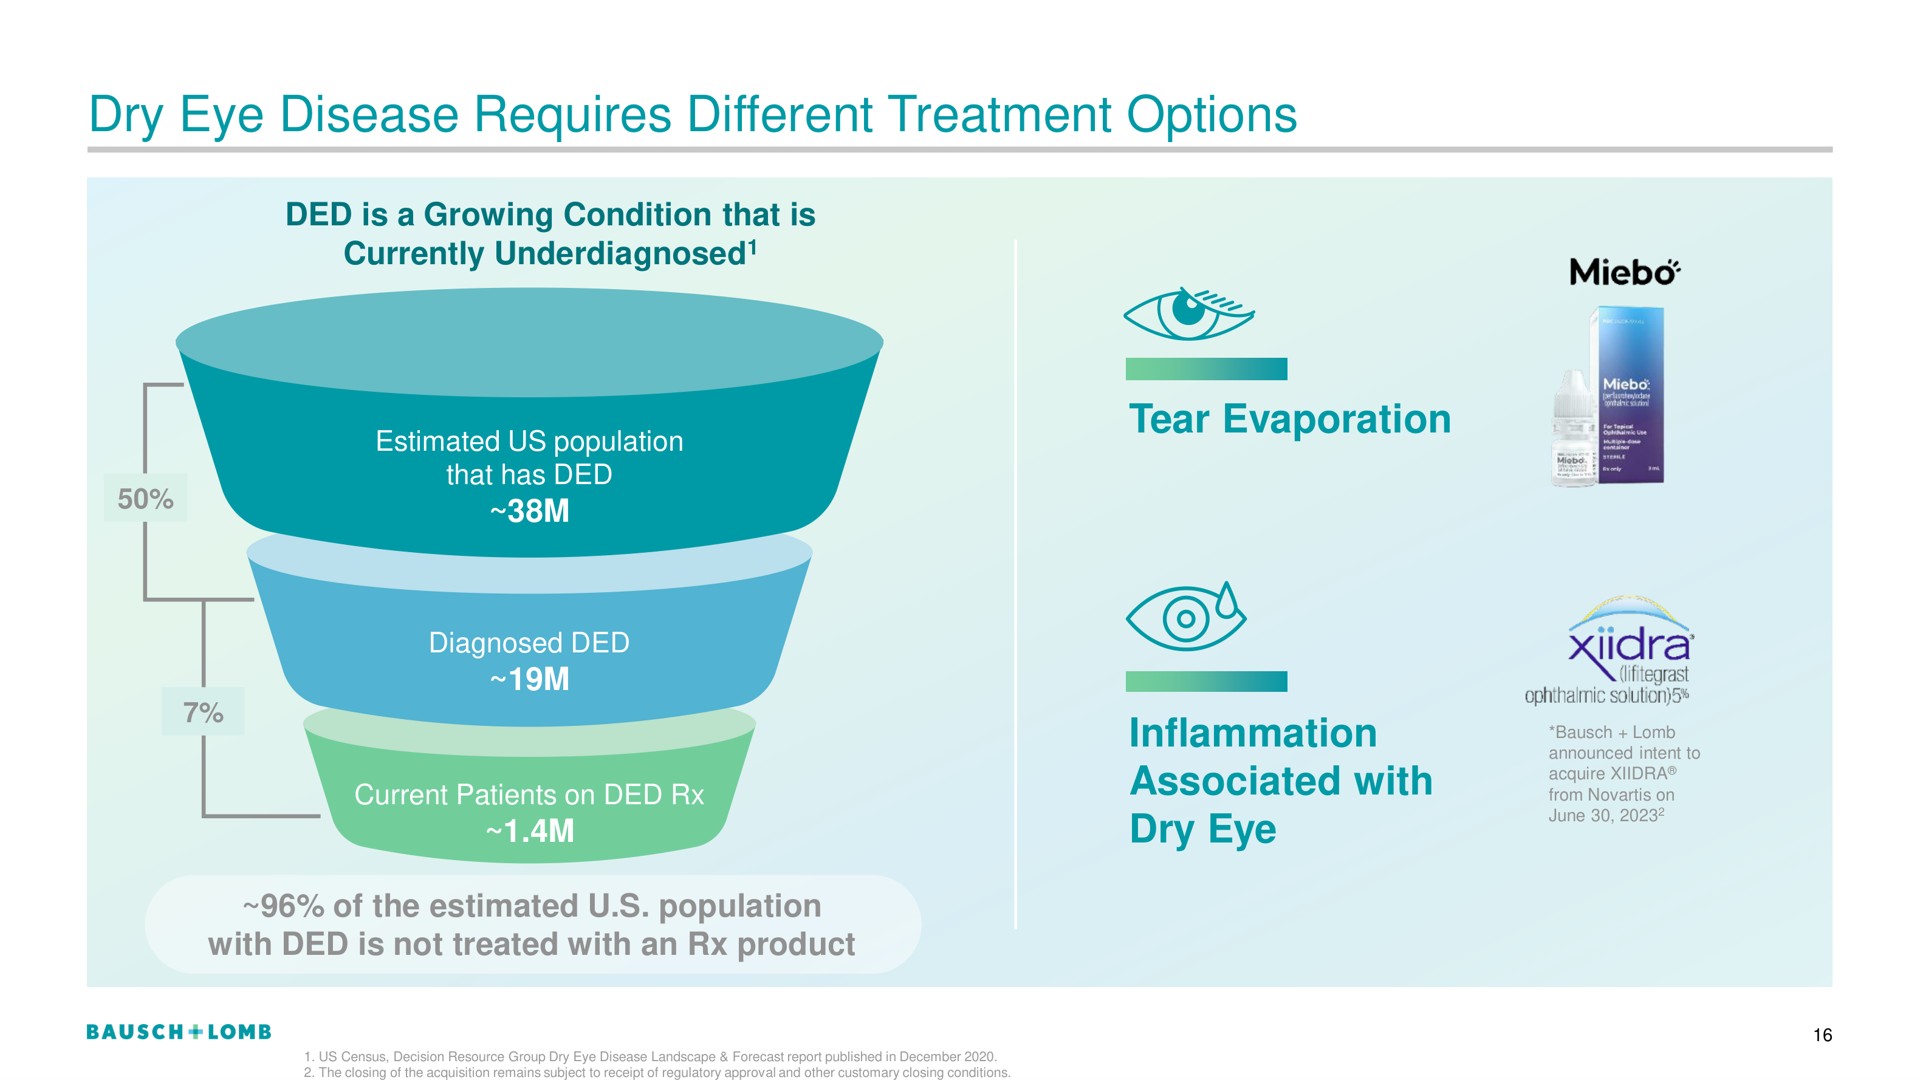 dry eye disease requires different treatment options | Bausch+Lomb